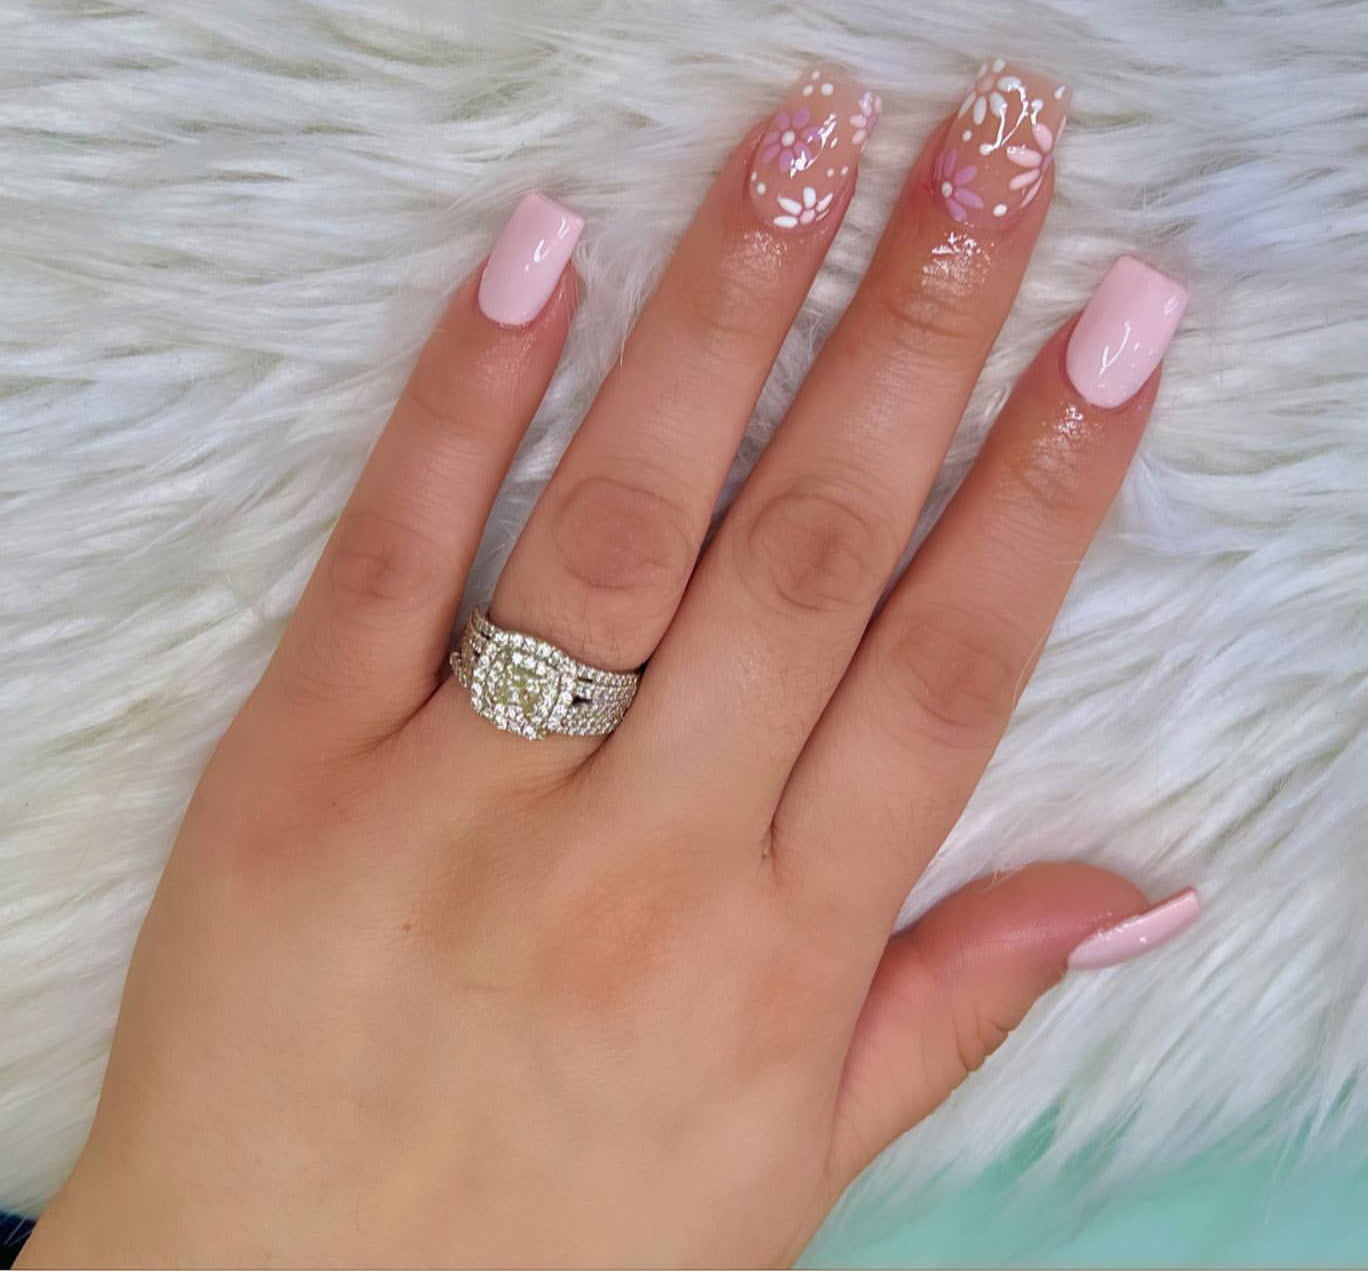 19 Easy Easter Nails Designs You Have to Try This Spring 2022